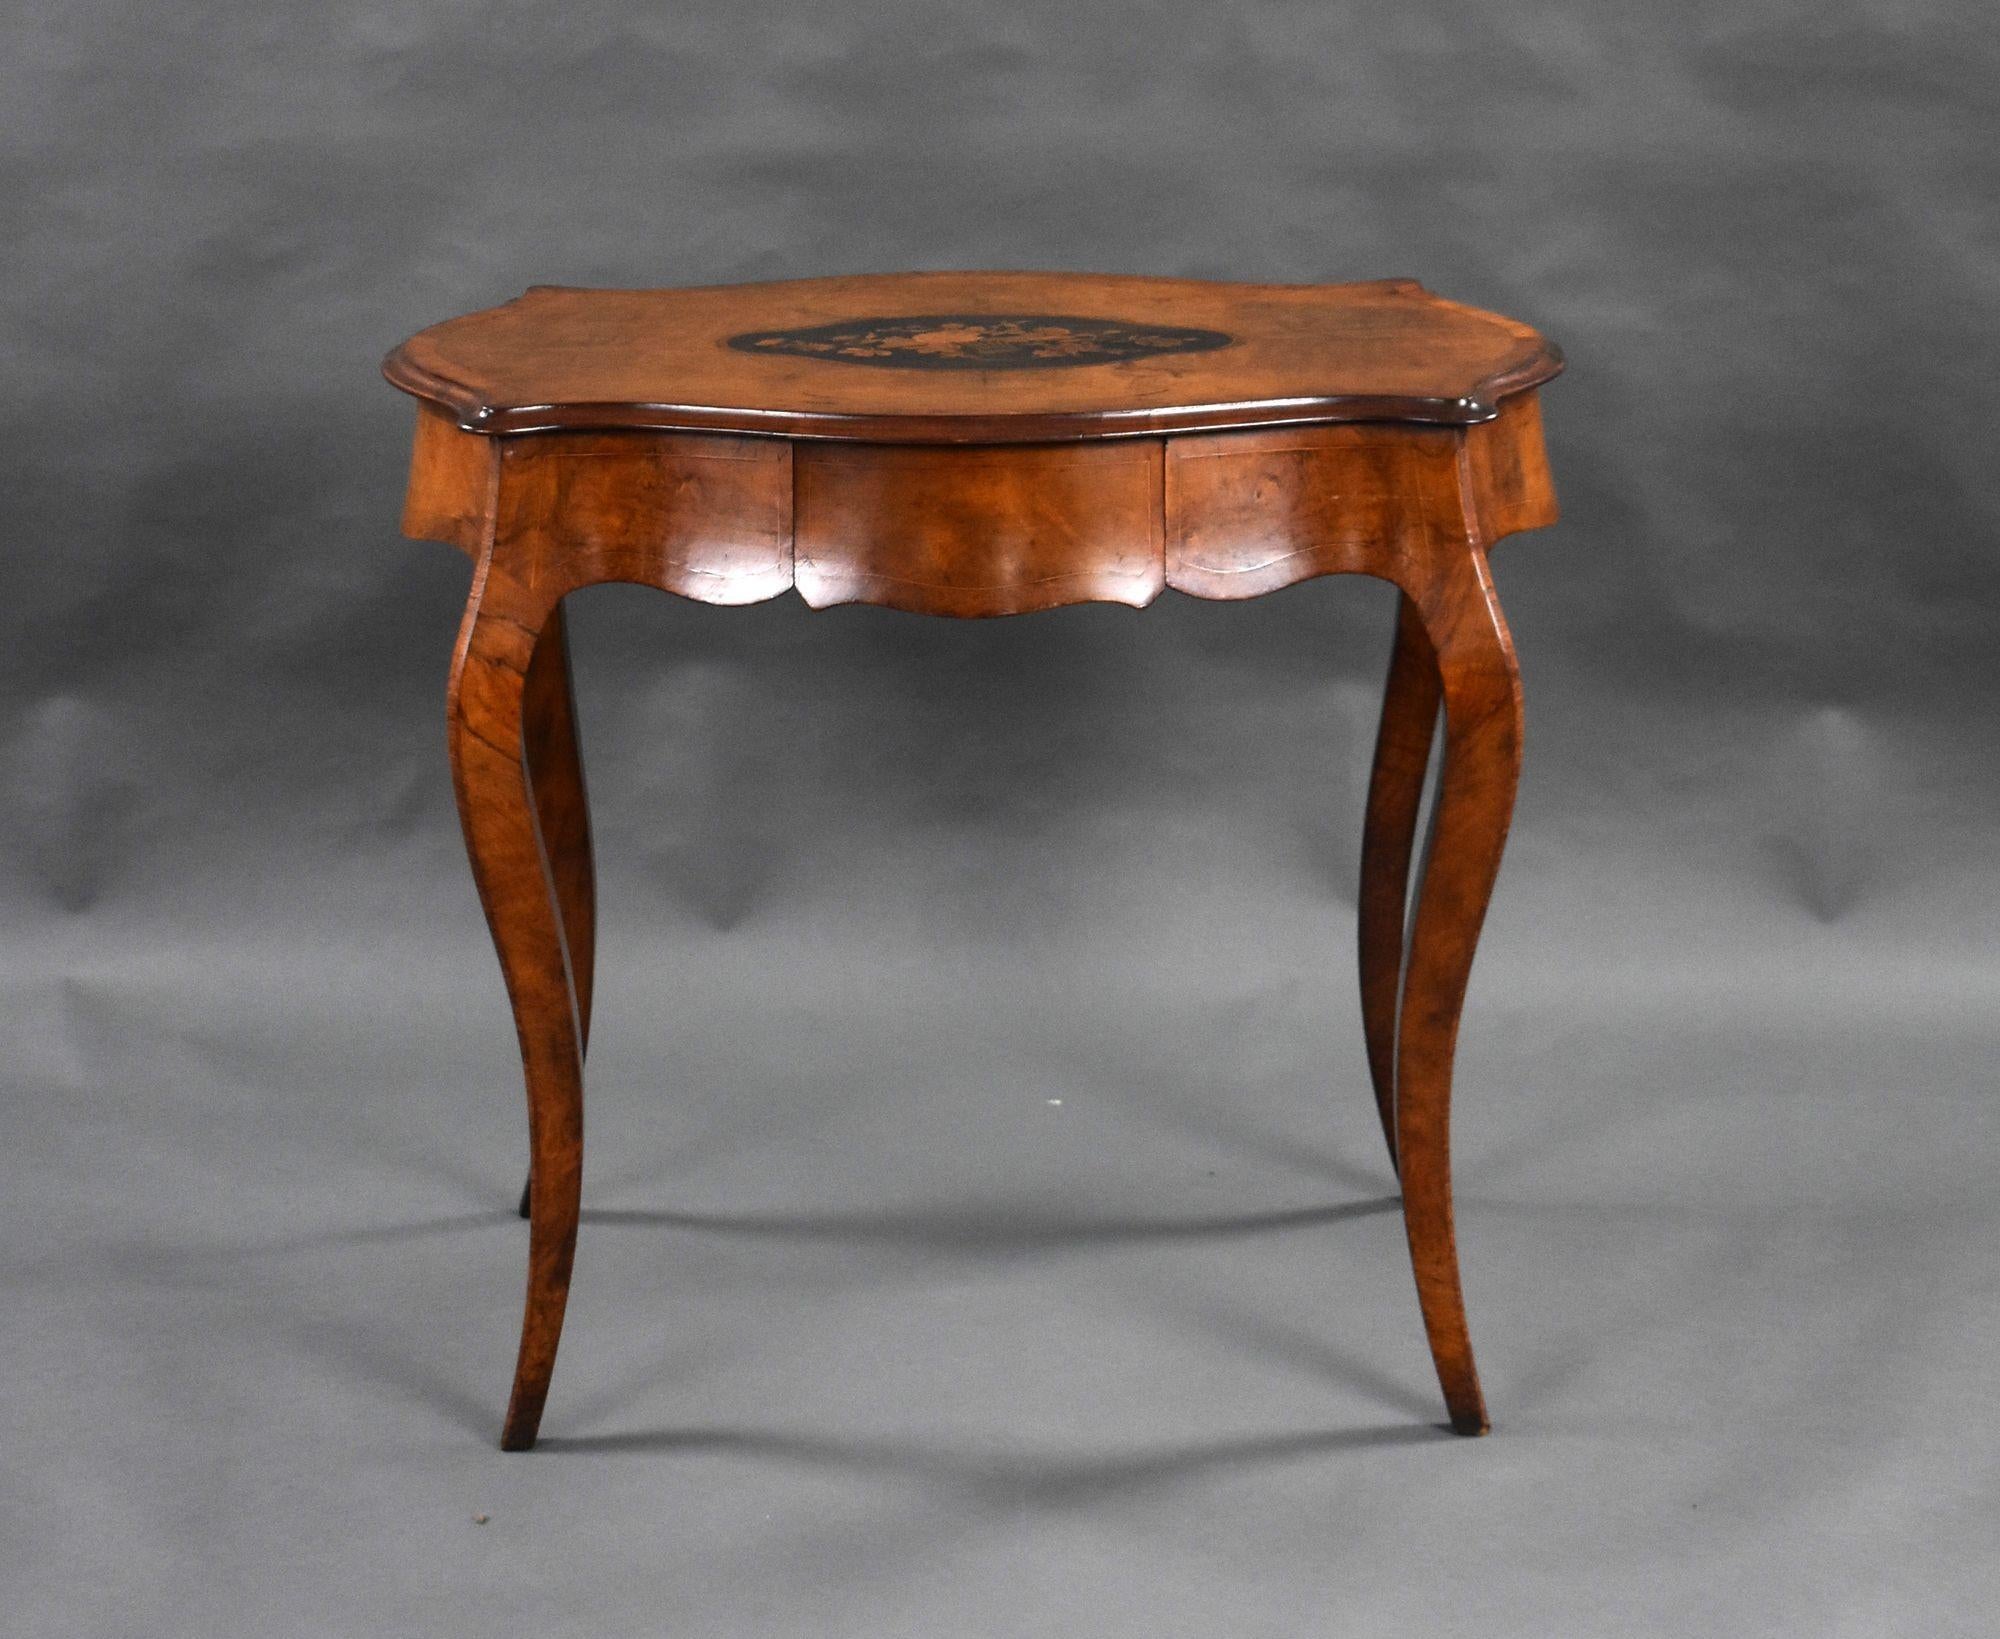 For sale is a good quality Victorian walnut marquetry centre table, serpentine in form, having an inlaid top above a central drawer, standing on elegant legs, this piece is in very good condition.

Width: 81cm Depth: 55cm Height: 72cm